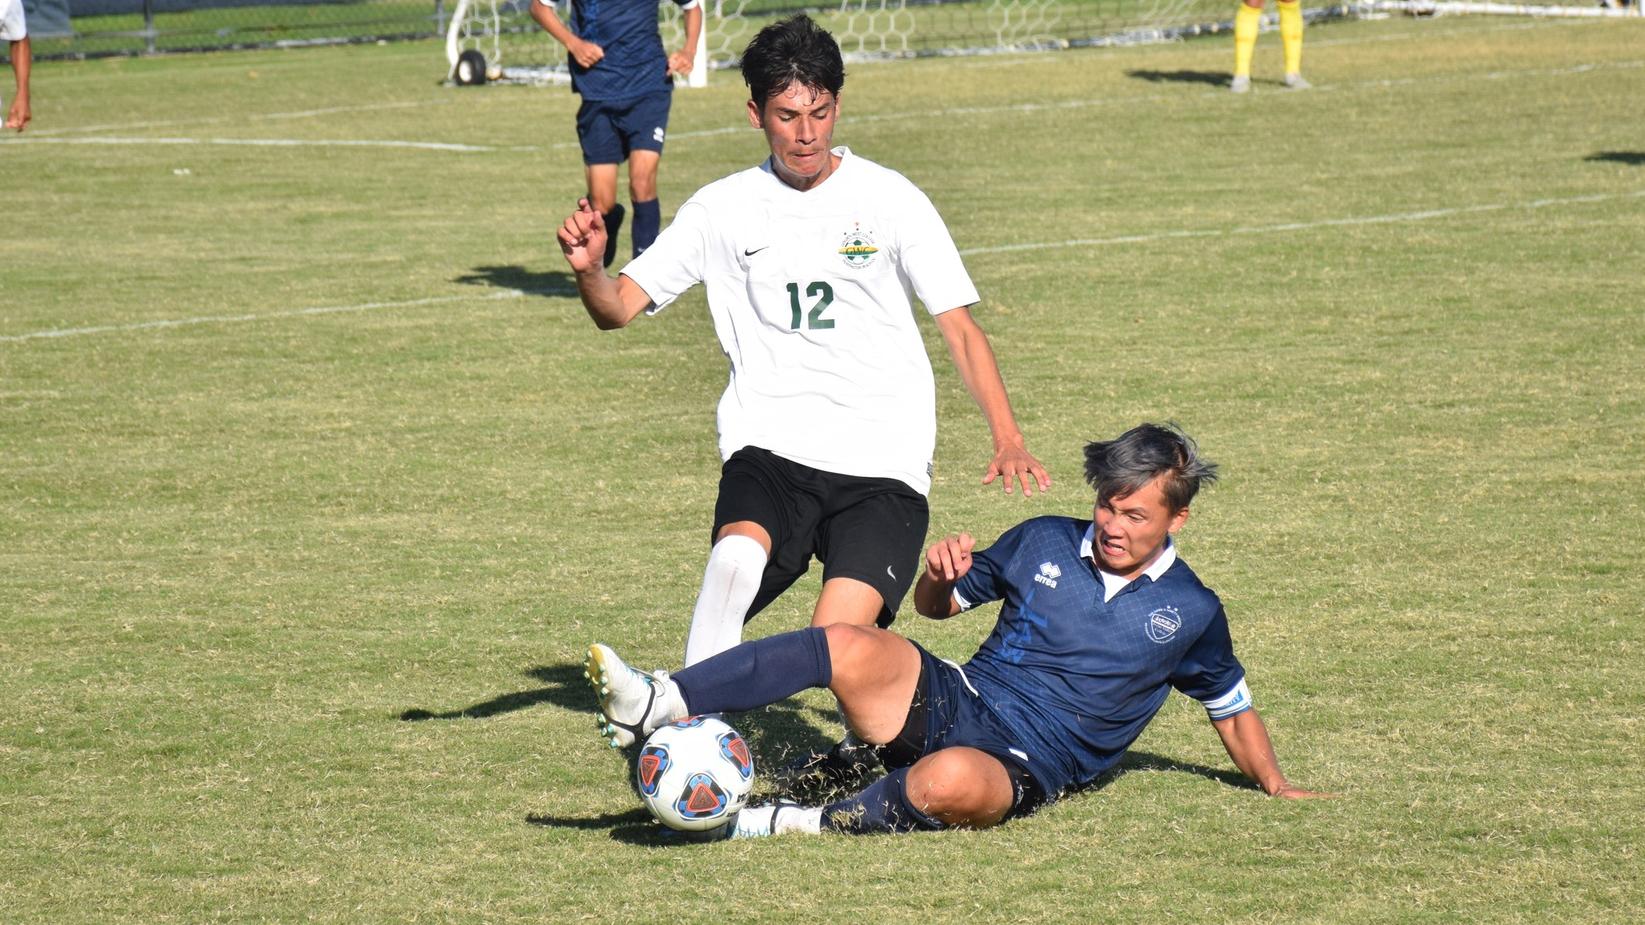 Men's soccer team battles to 1-1 draw with Golden West